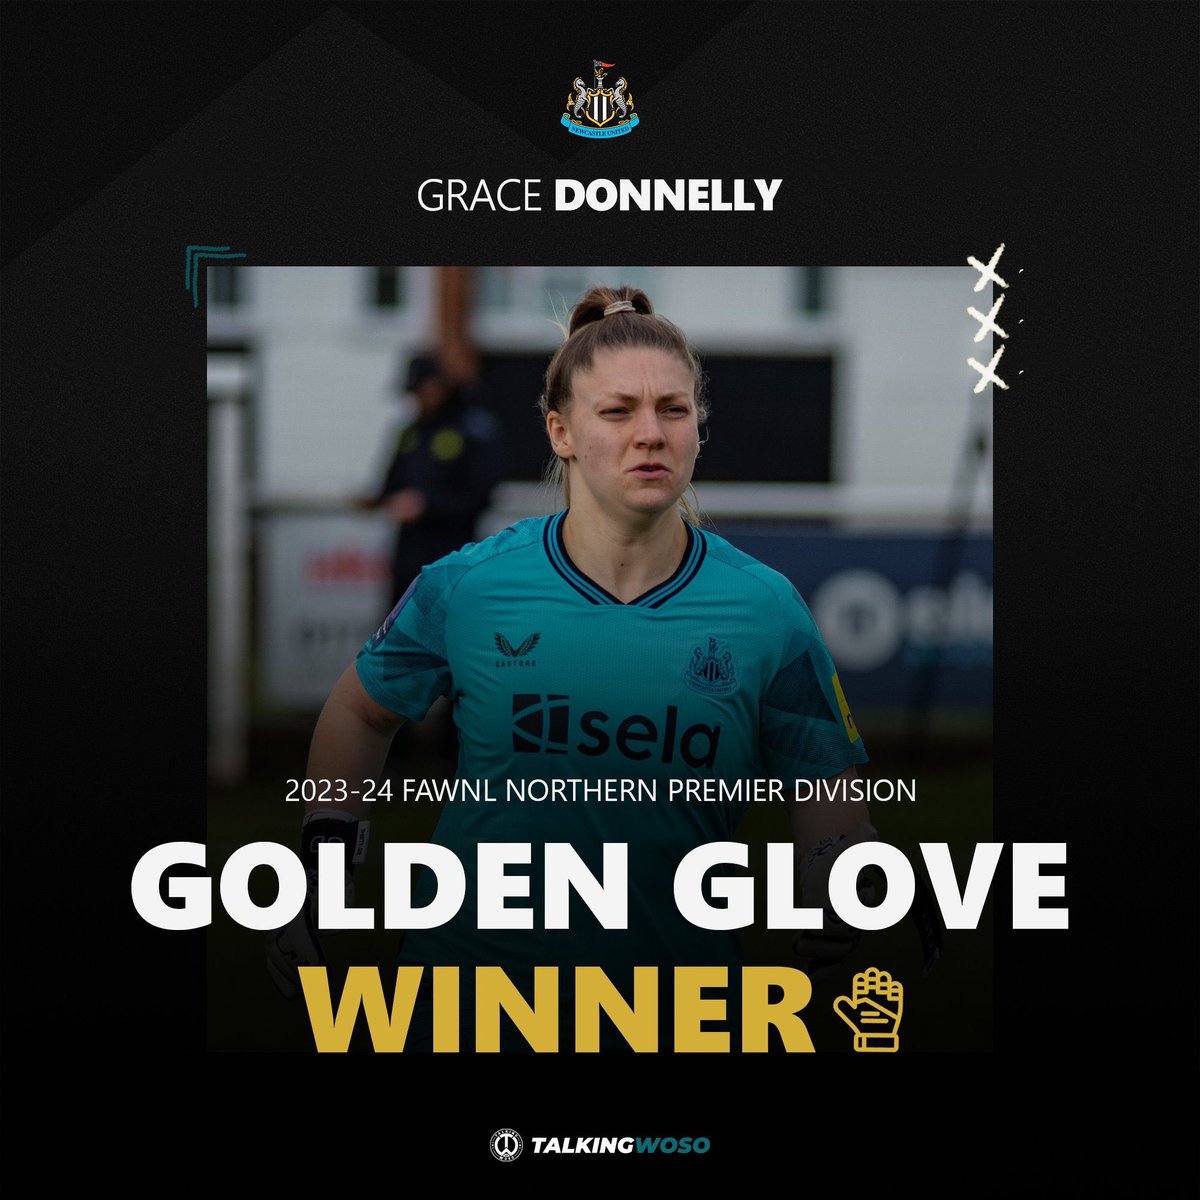 Super proud of @DonnellyG1 , that’s 2 in 2 seasons 👏 🏆 Blessed to work with a fantastic GK Union, with @hannahreid__x , @WoodsLilie & @elenvalentine1 who push each other on, pick each other up & work so hard together throughout the season. The epitomy of what a Union is 🧤